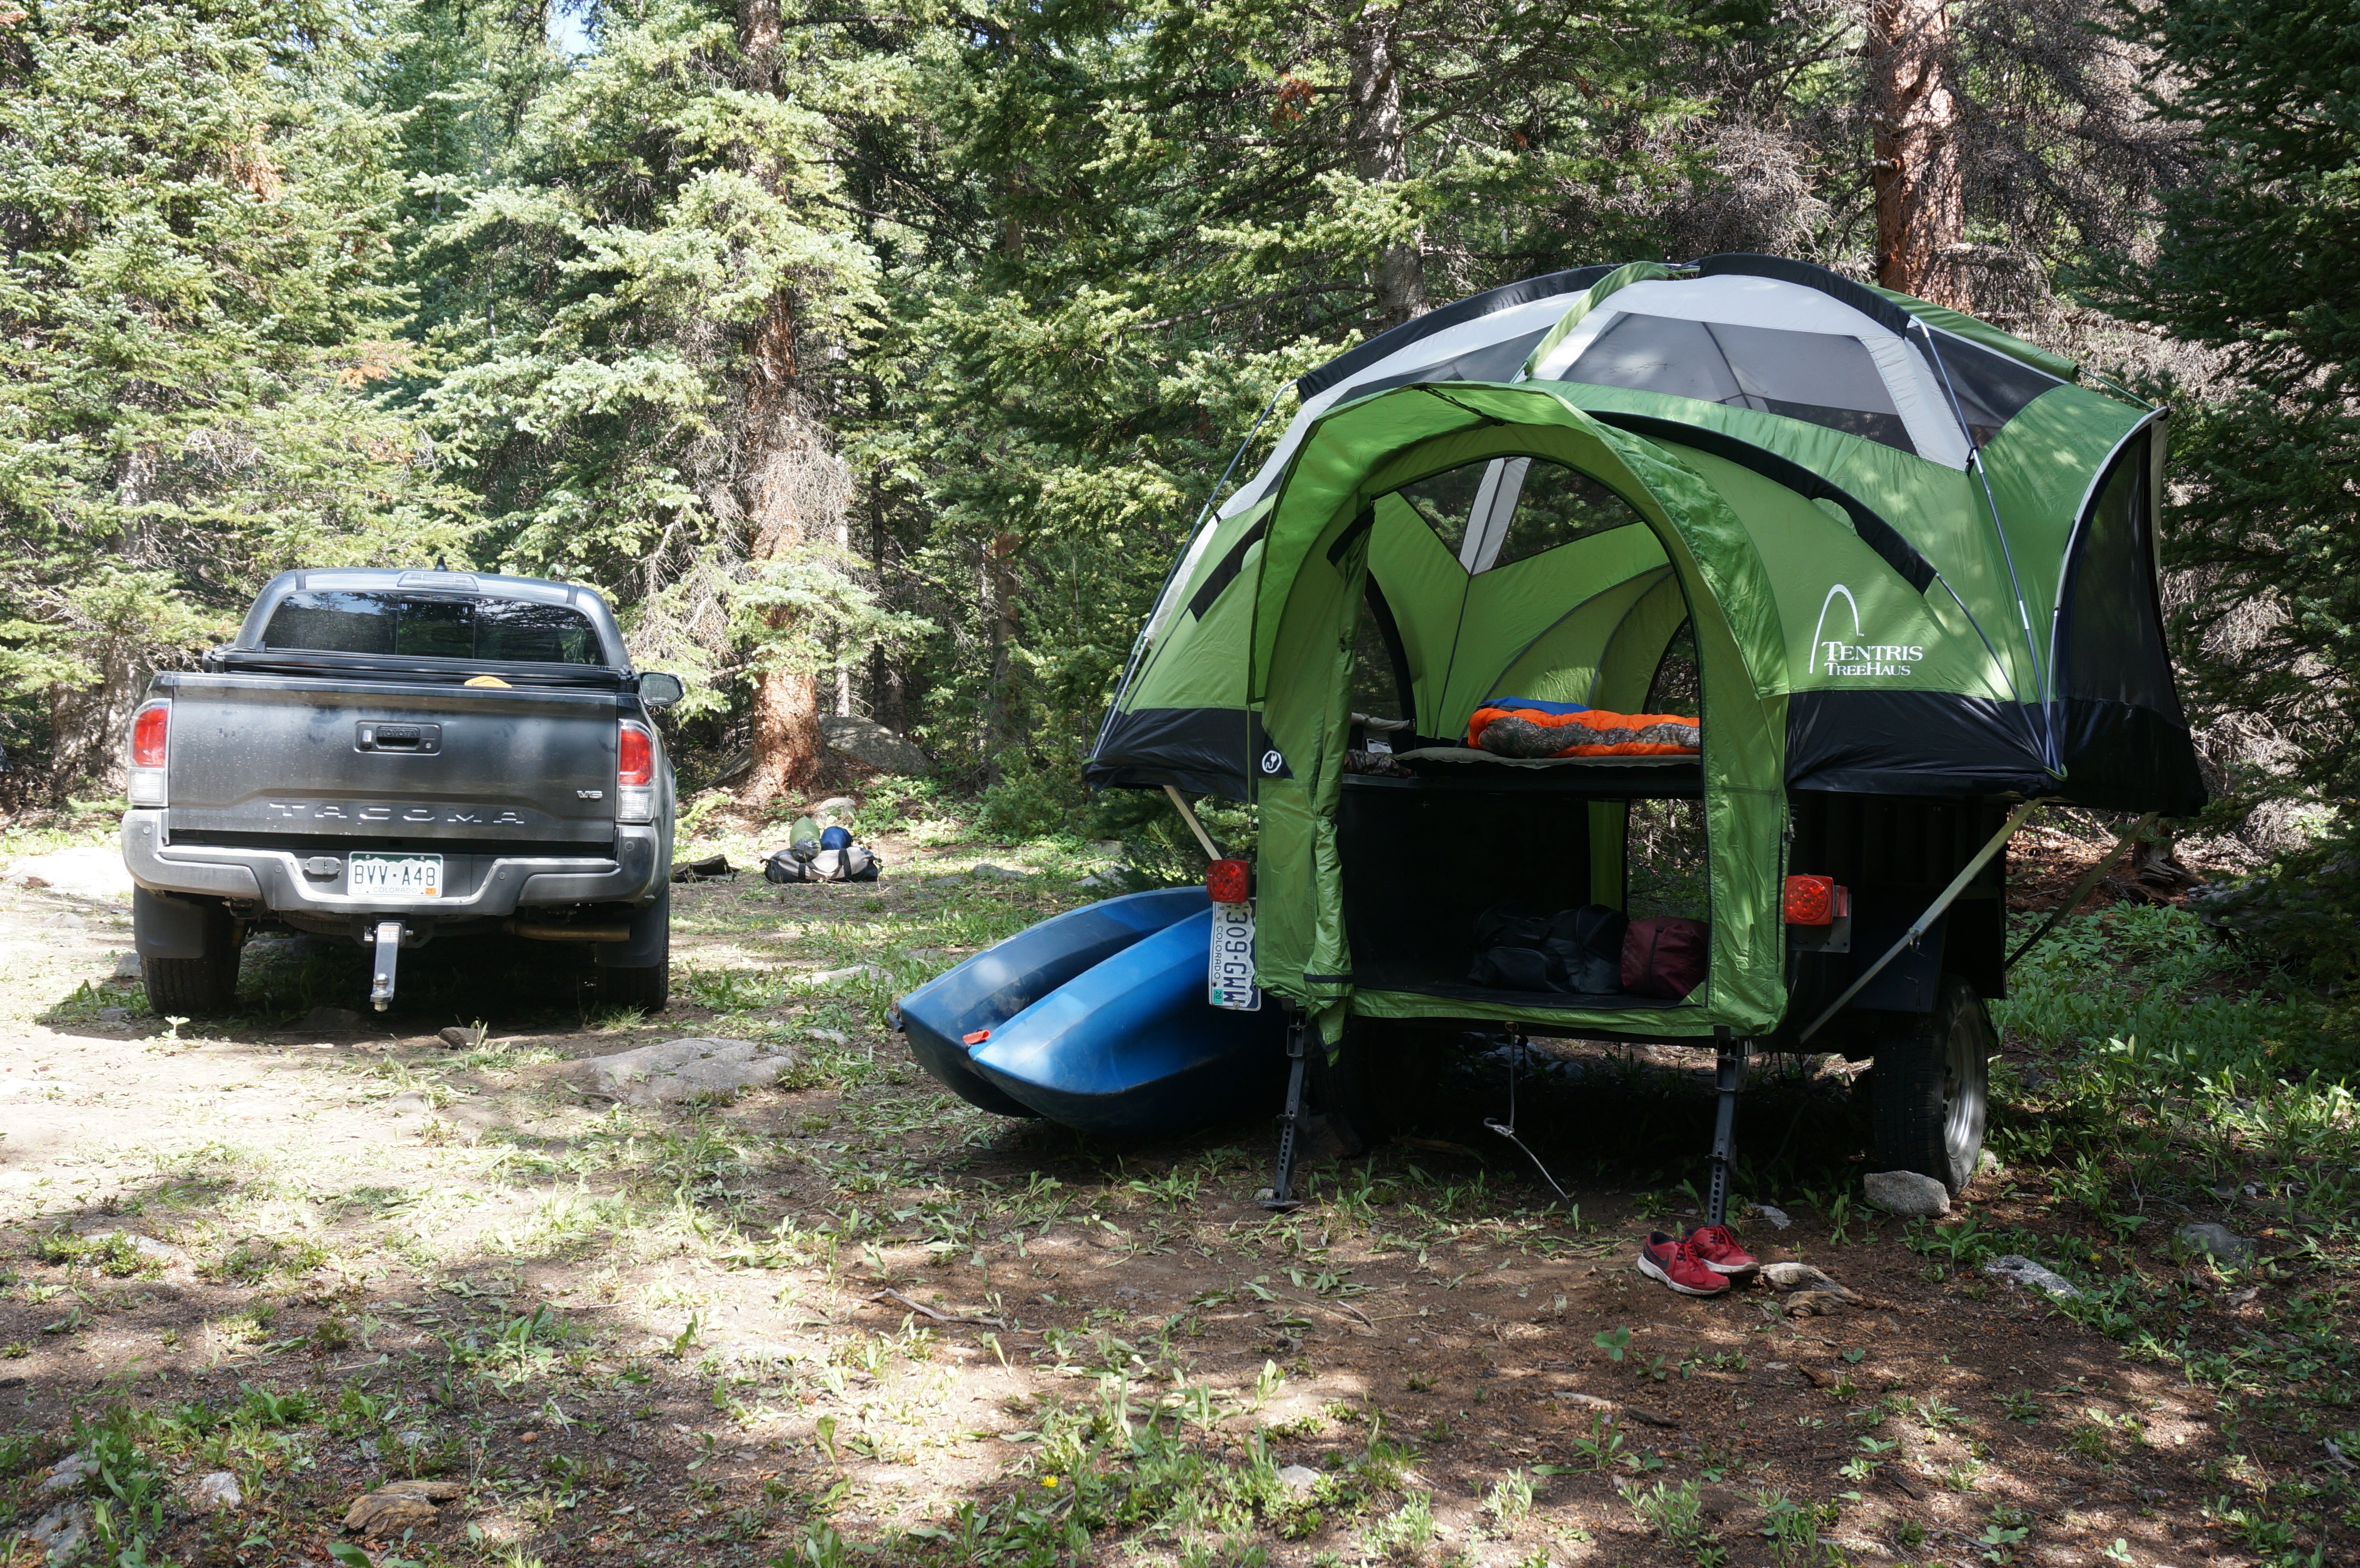 Camping Trailers